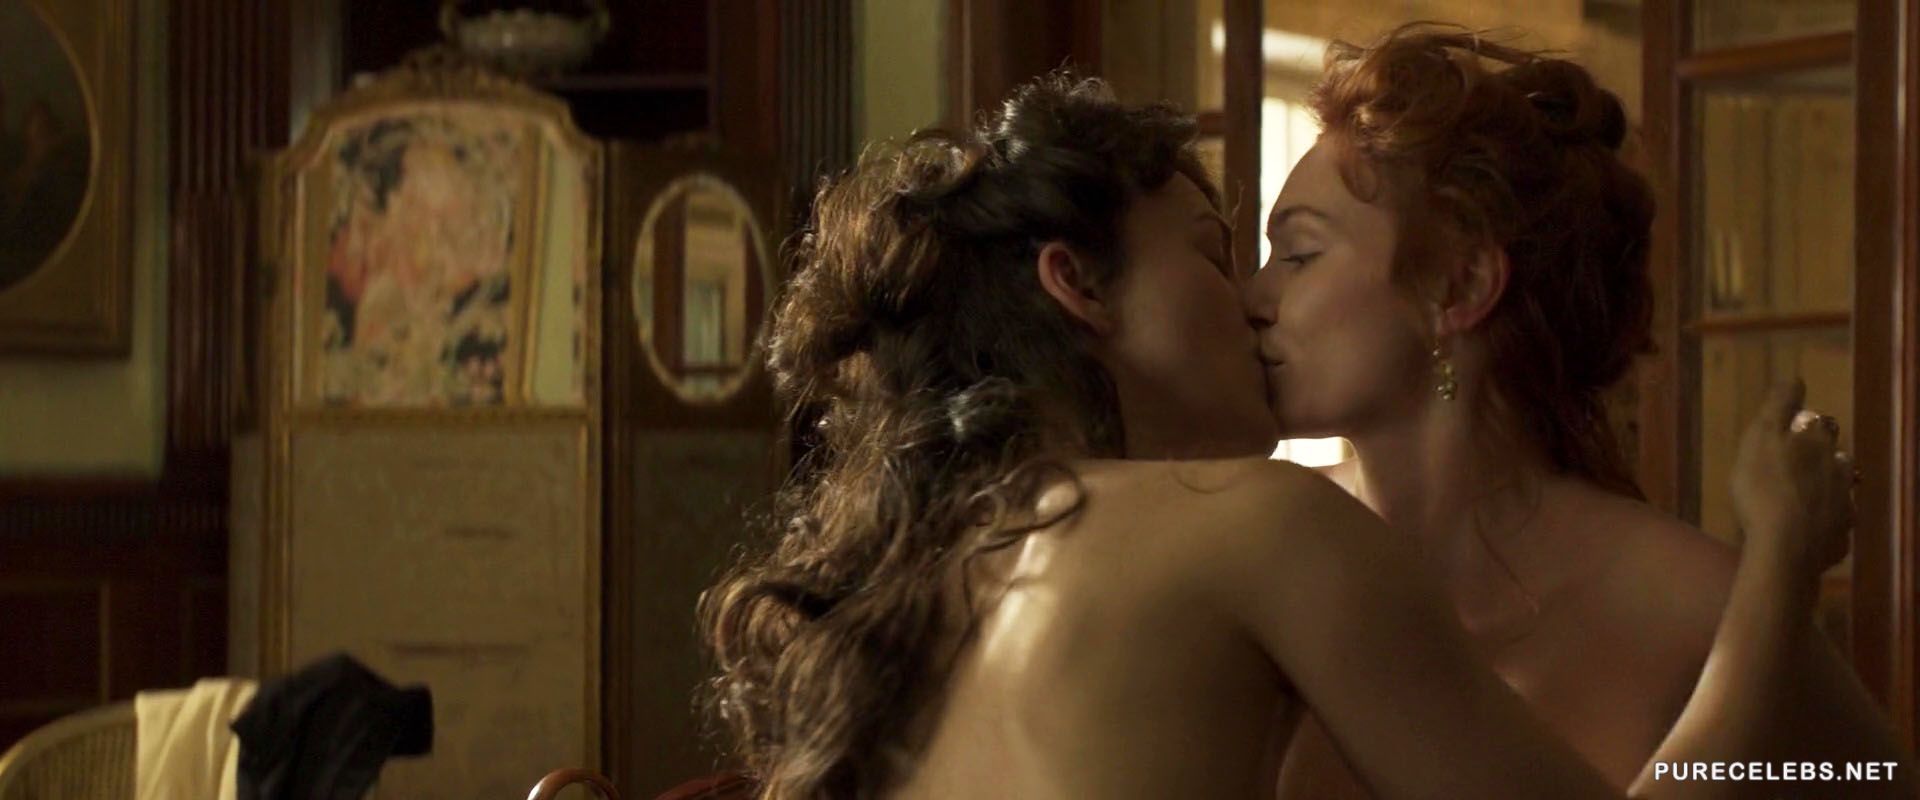 Keira Knightley and Eleanor Tomlinson Nude And Hot Lesbian Scenes From Colette (2018) pic pic